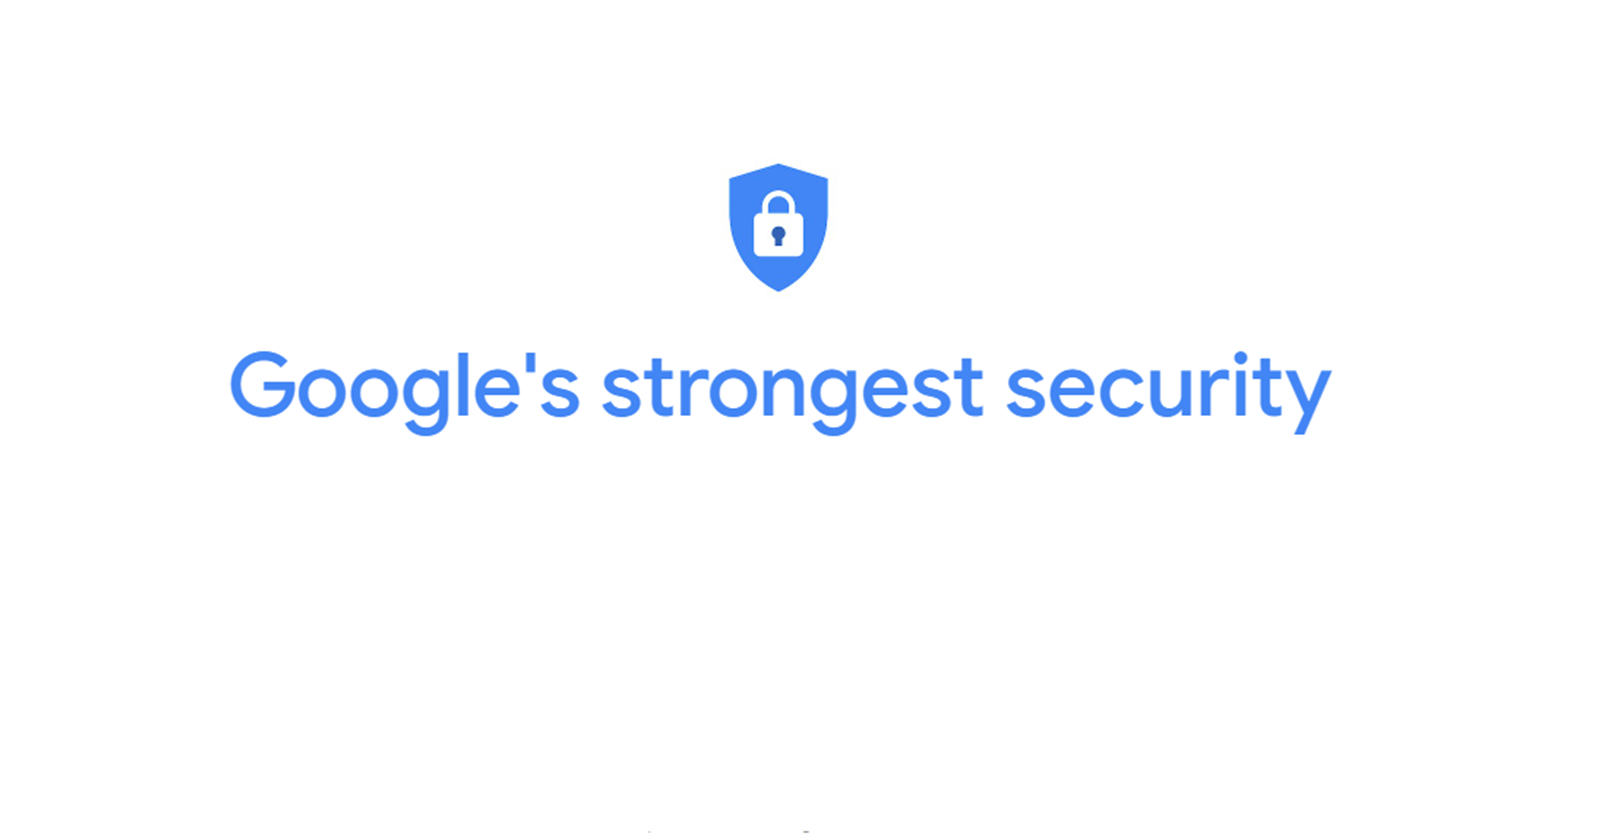 Google shares how to address 6 common cybersecurity mistakes on your Pixel device